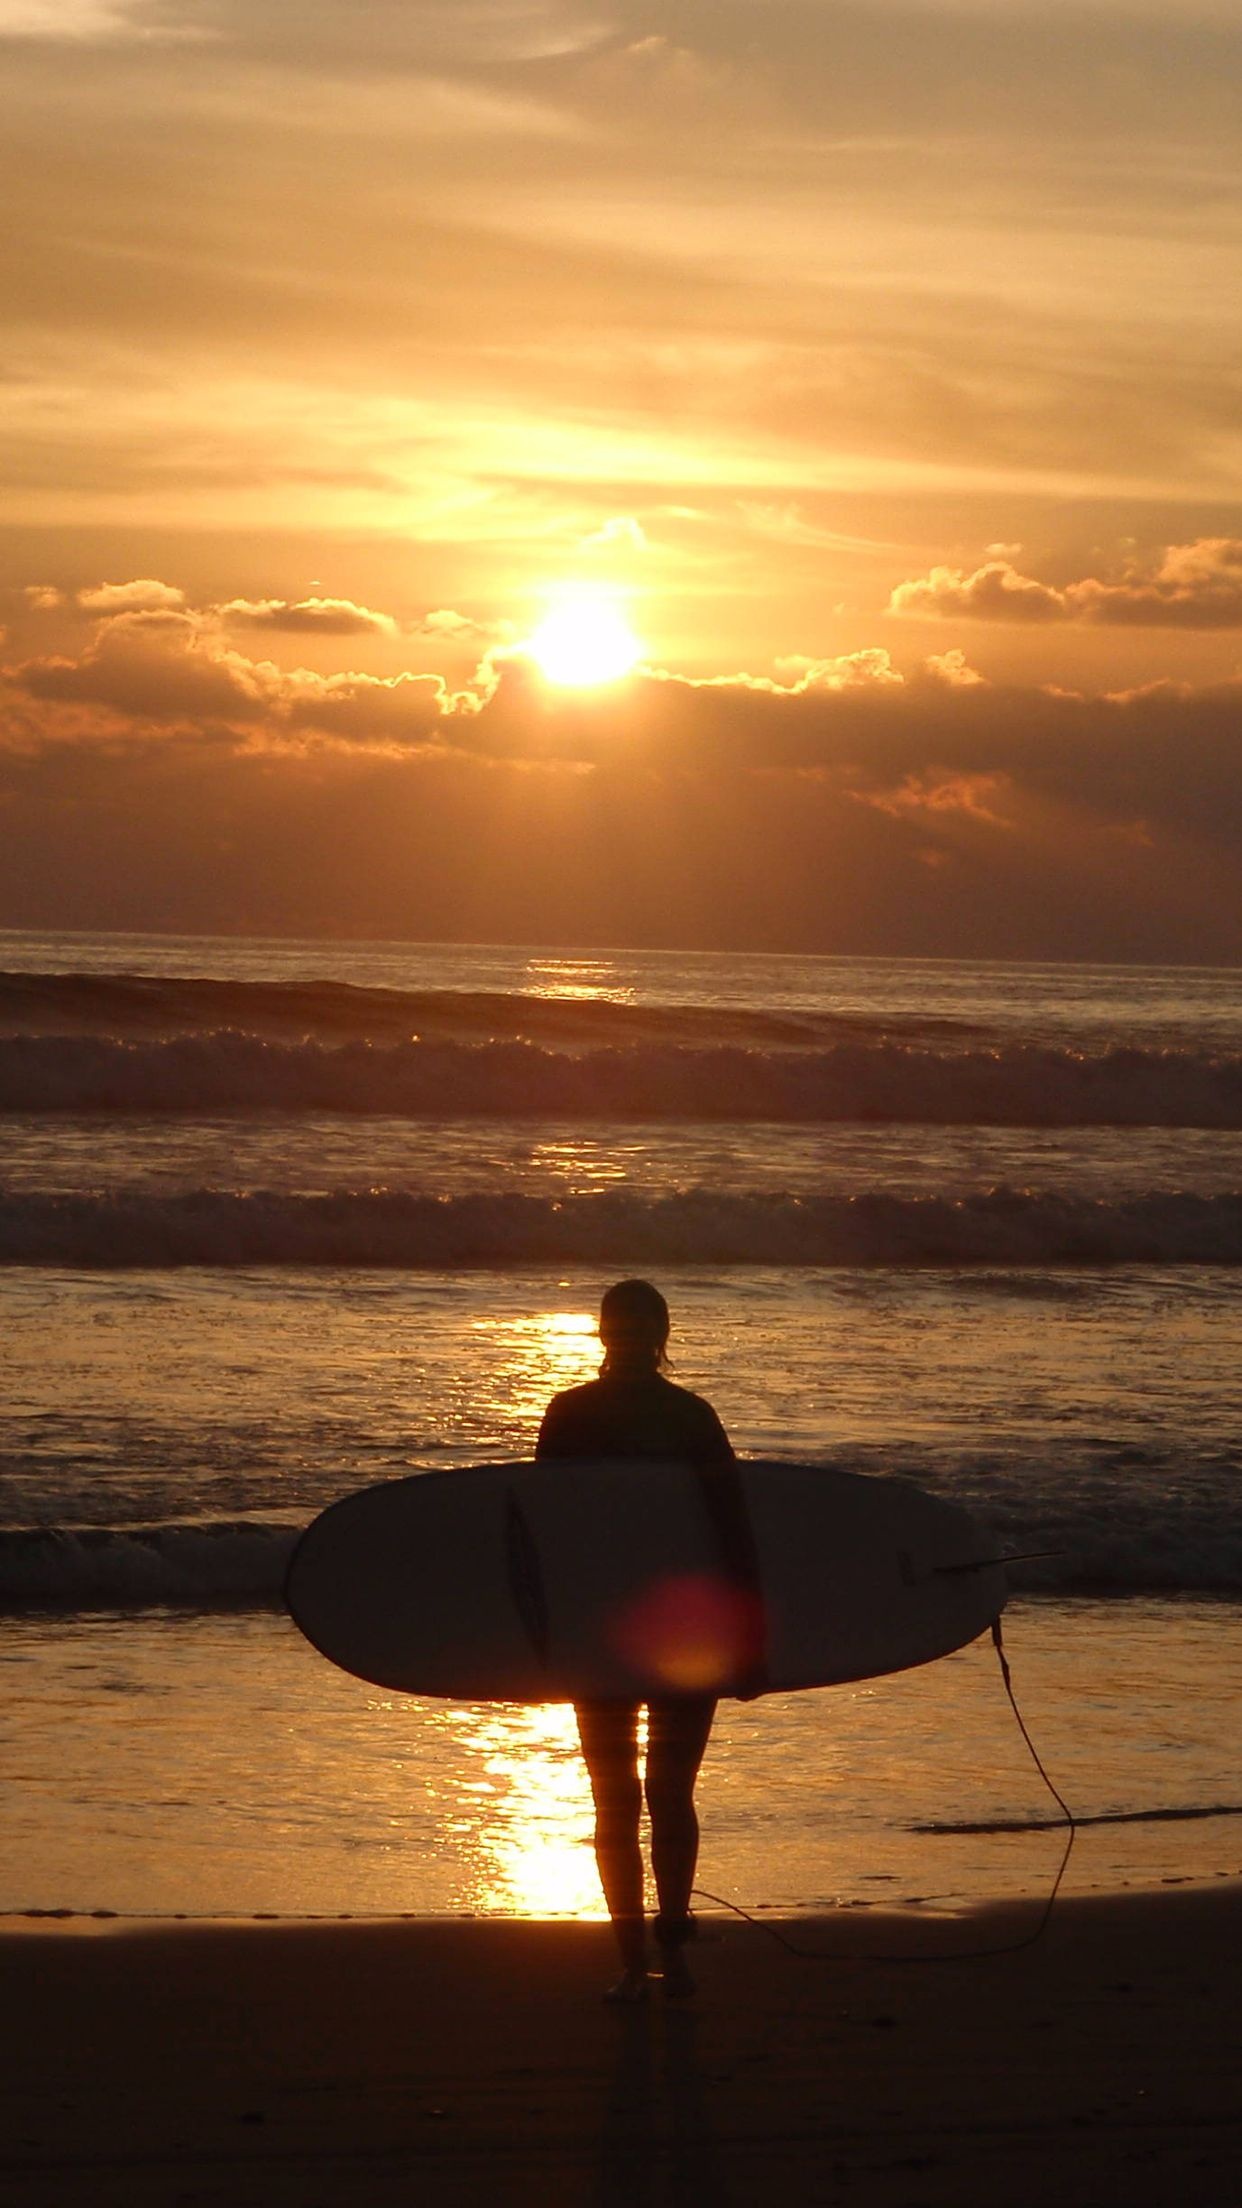 Surfing: Recreational water sports in the sunset, Longboarding style. 1250x2210 HD Wallpaper.